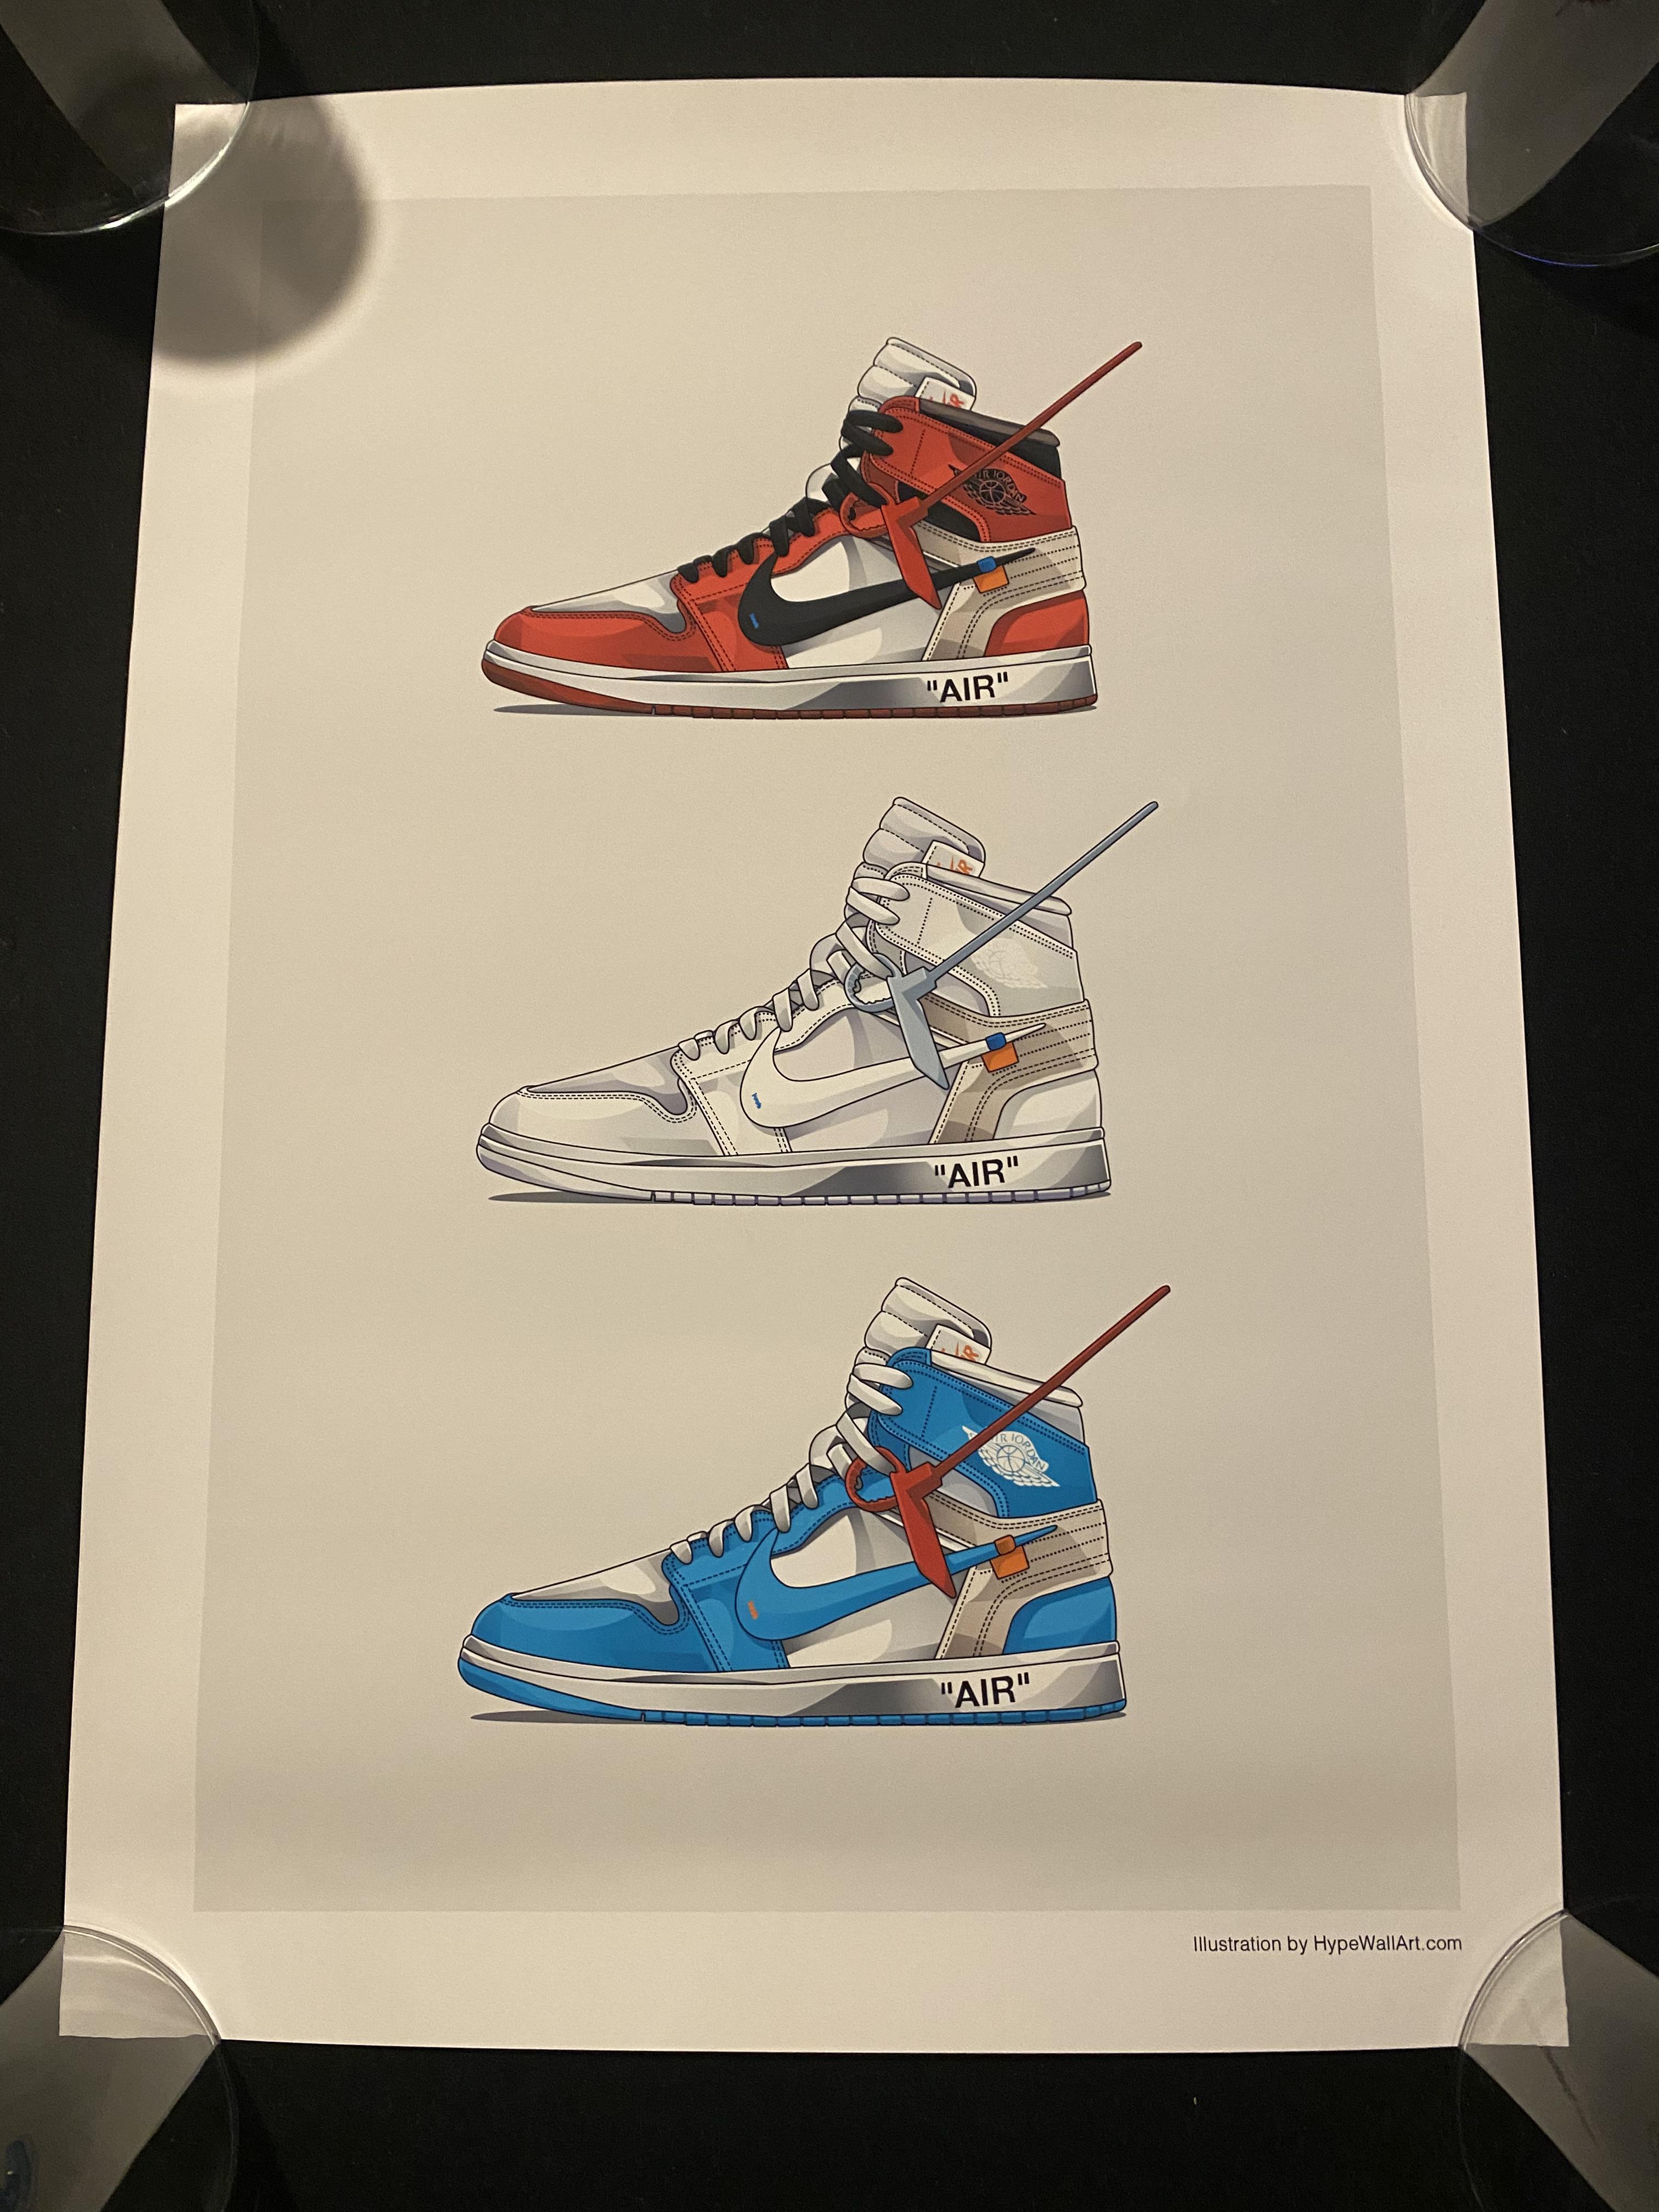 Nike Trainers Prints - Image 3 of 3